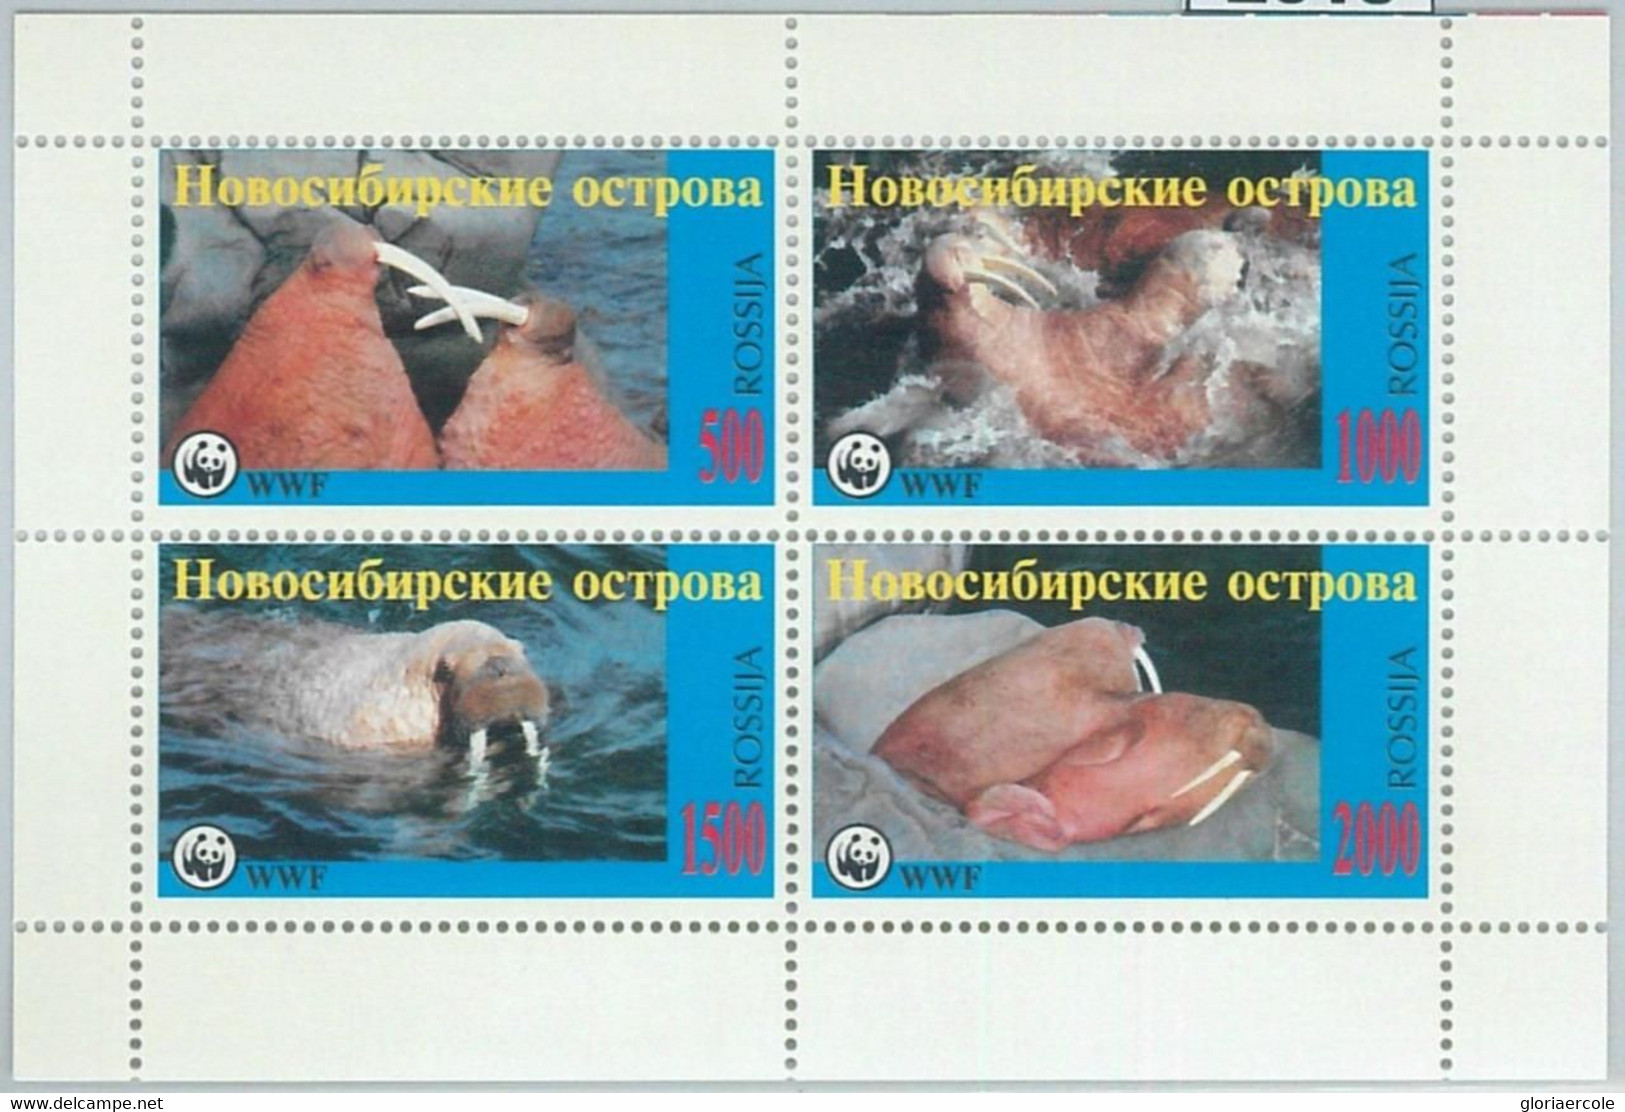 M2015 - RUSSIAN STATE, SHEET: WWF, Walruses, Seals, Marine Life, Animals  R04.22 - Used Stamps